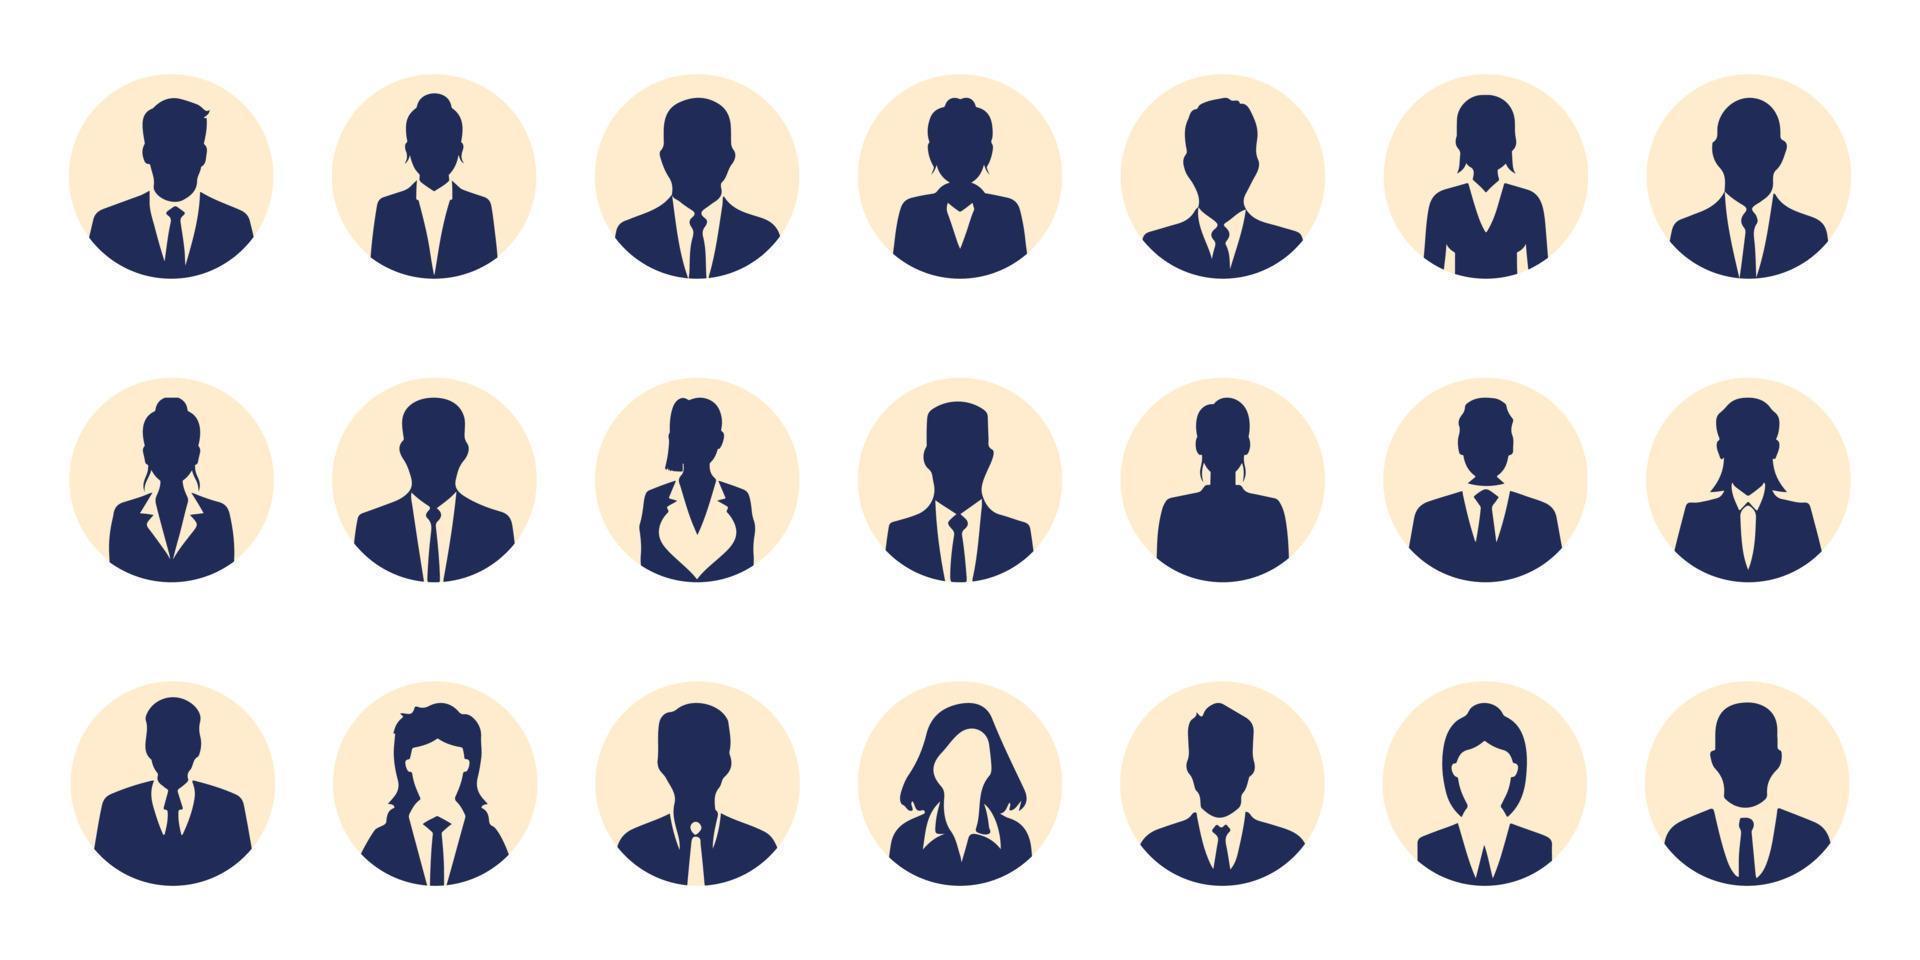 Business people avatar profile head icon silhouette set business man woman user face avatars icons silhouettes vector illustration